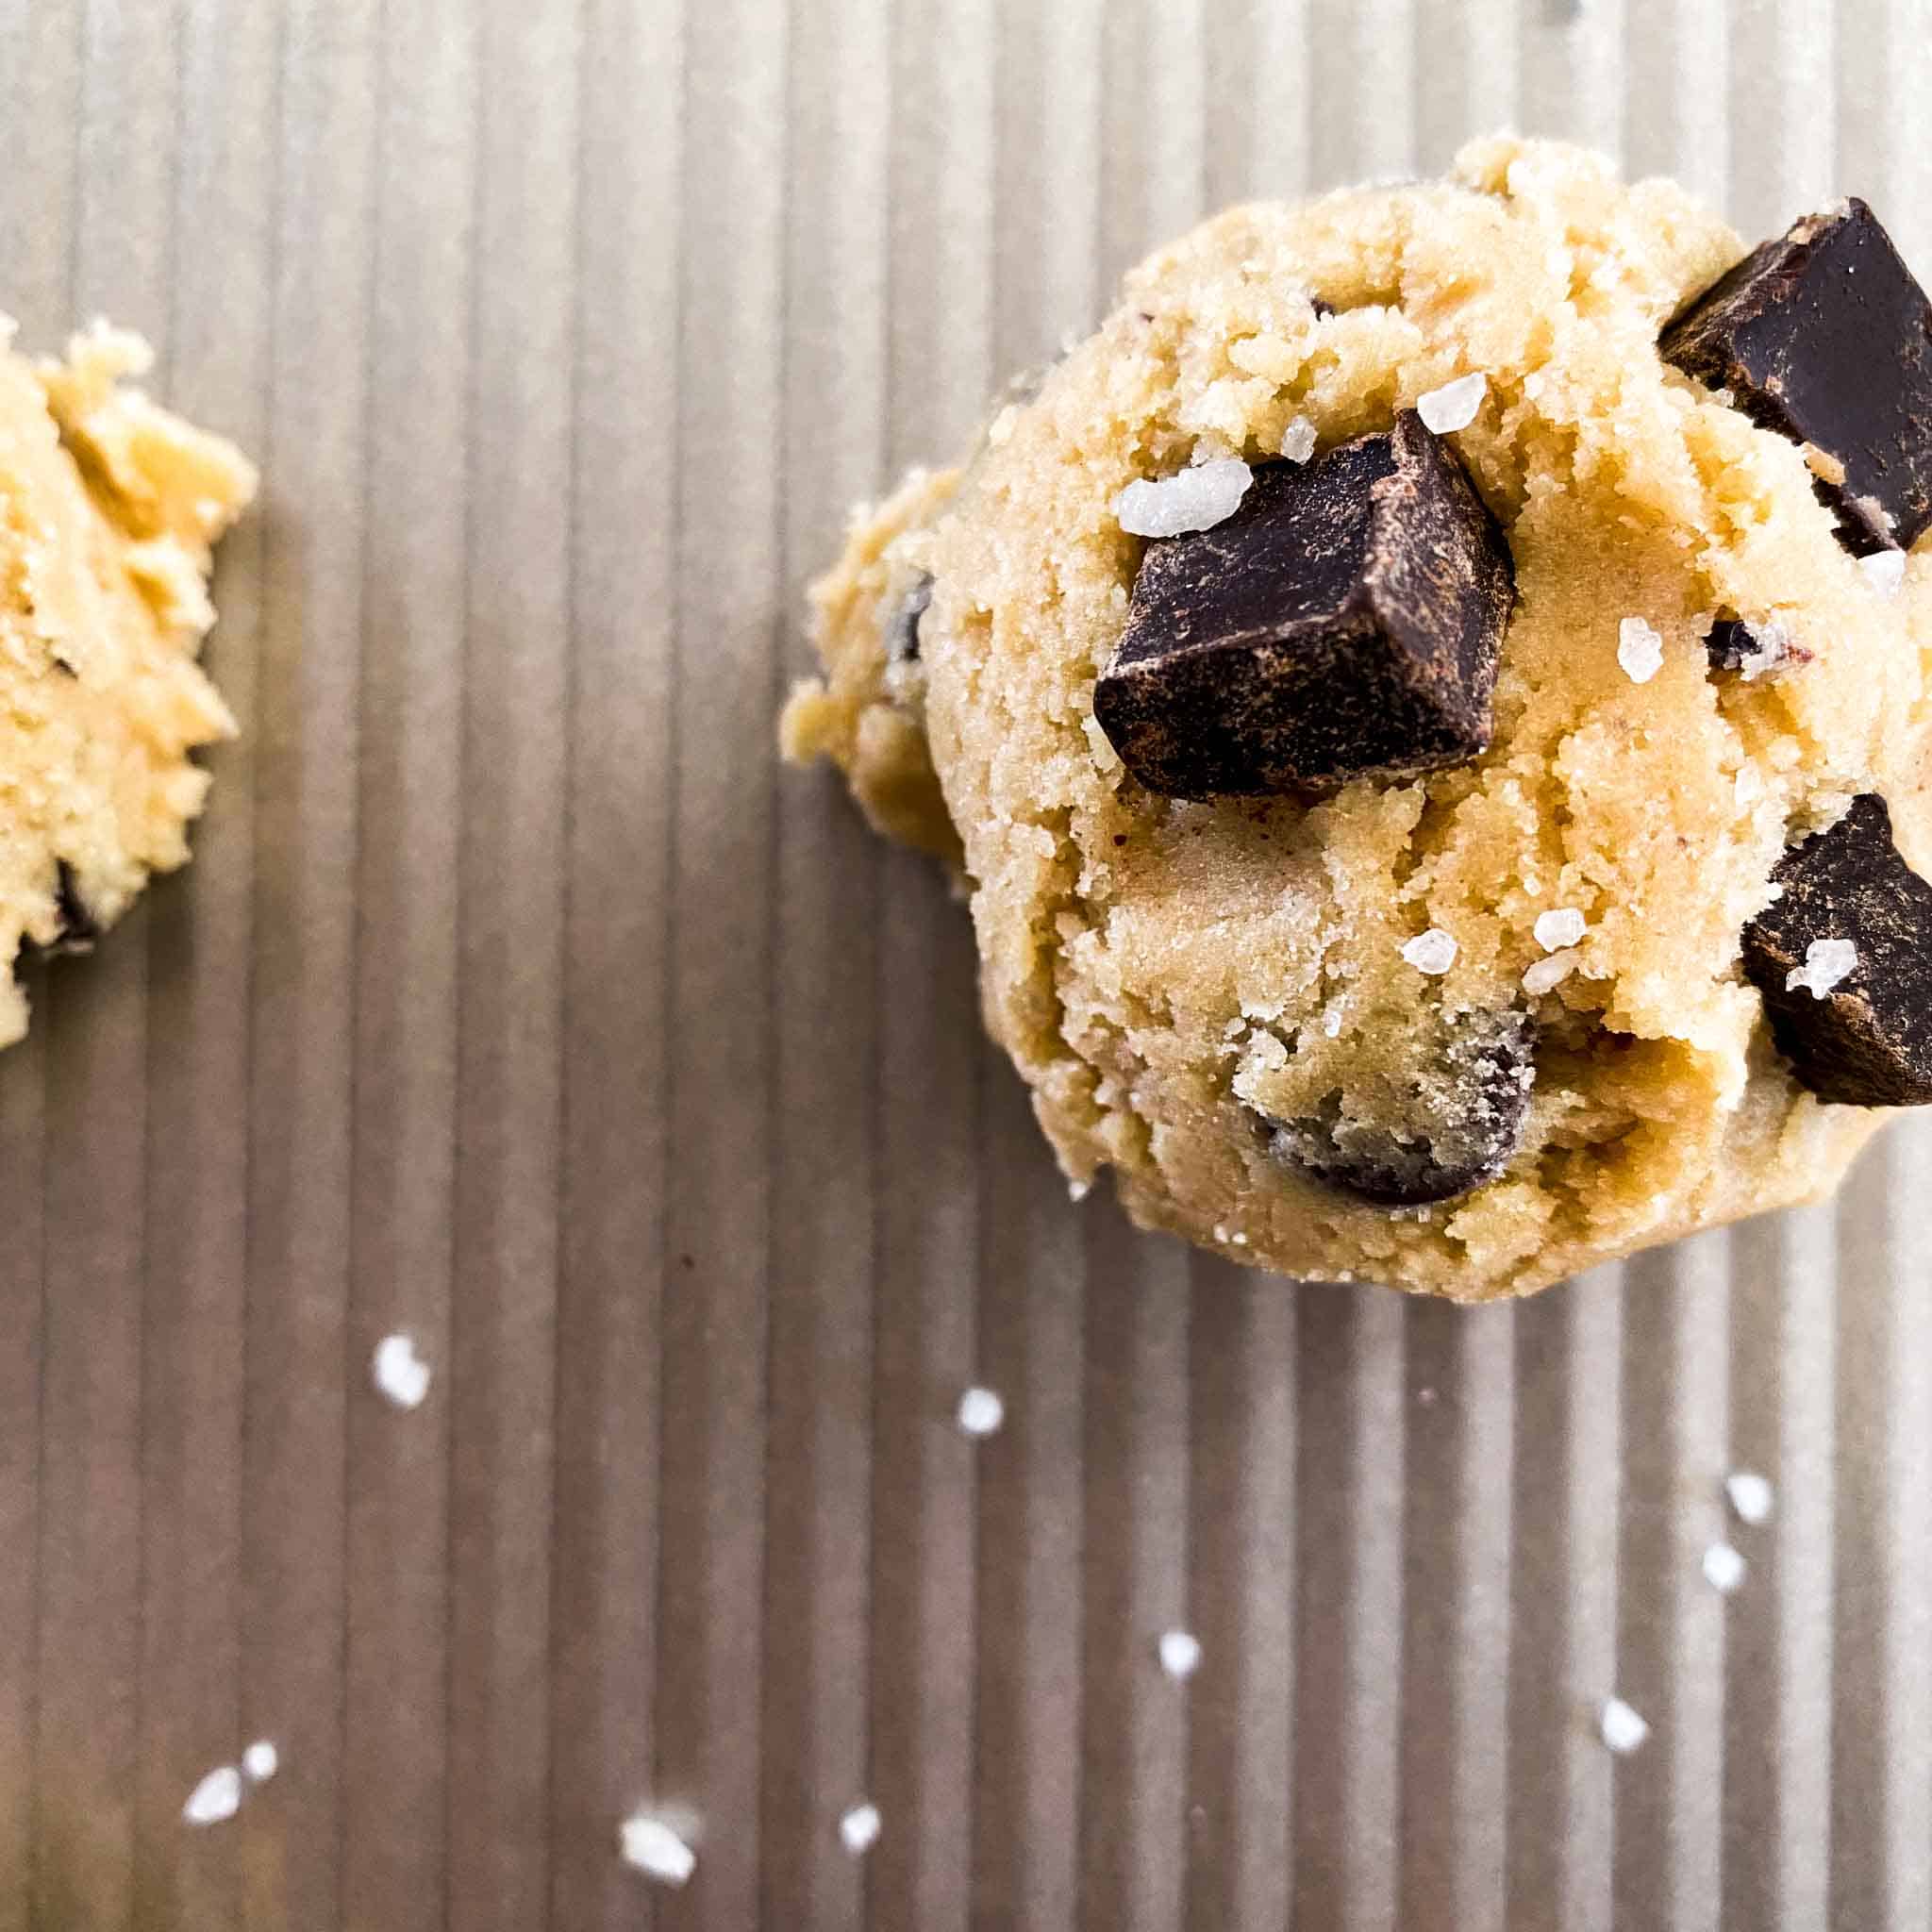 Two raw chocolate chip cookie dough balls on a baking sheet sprinkled with salt.